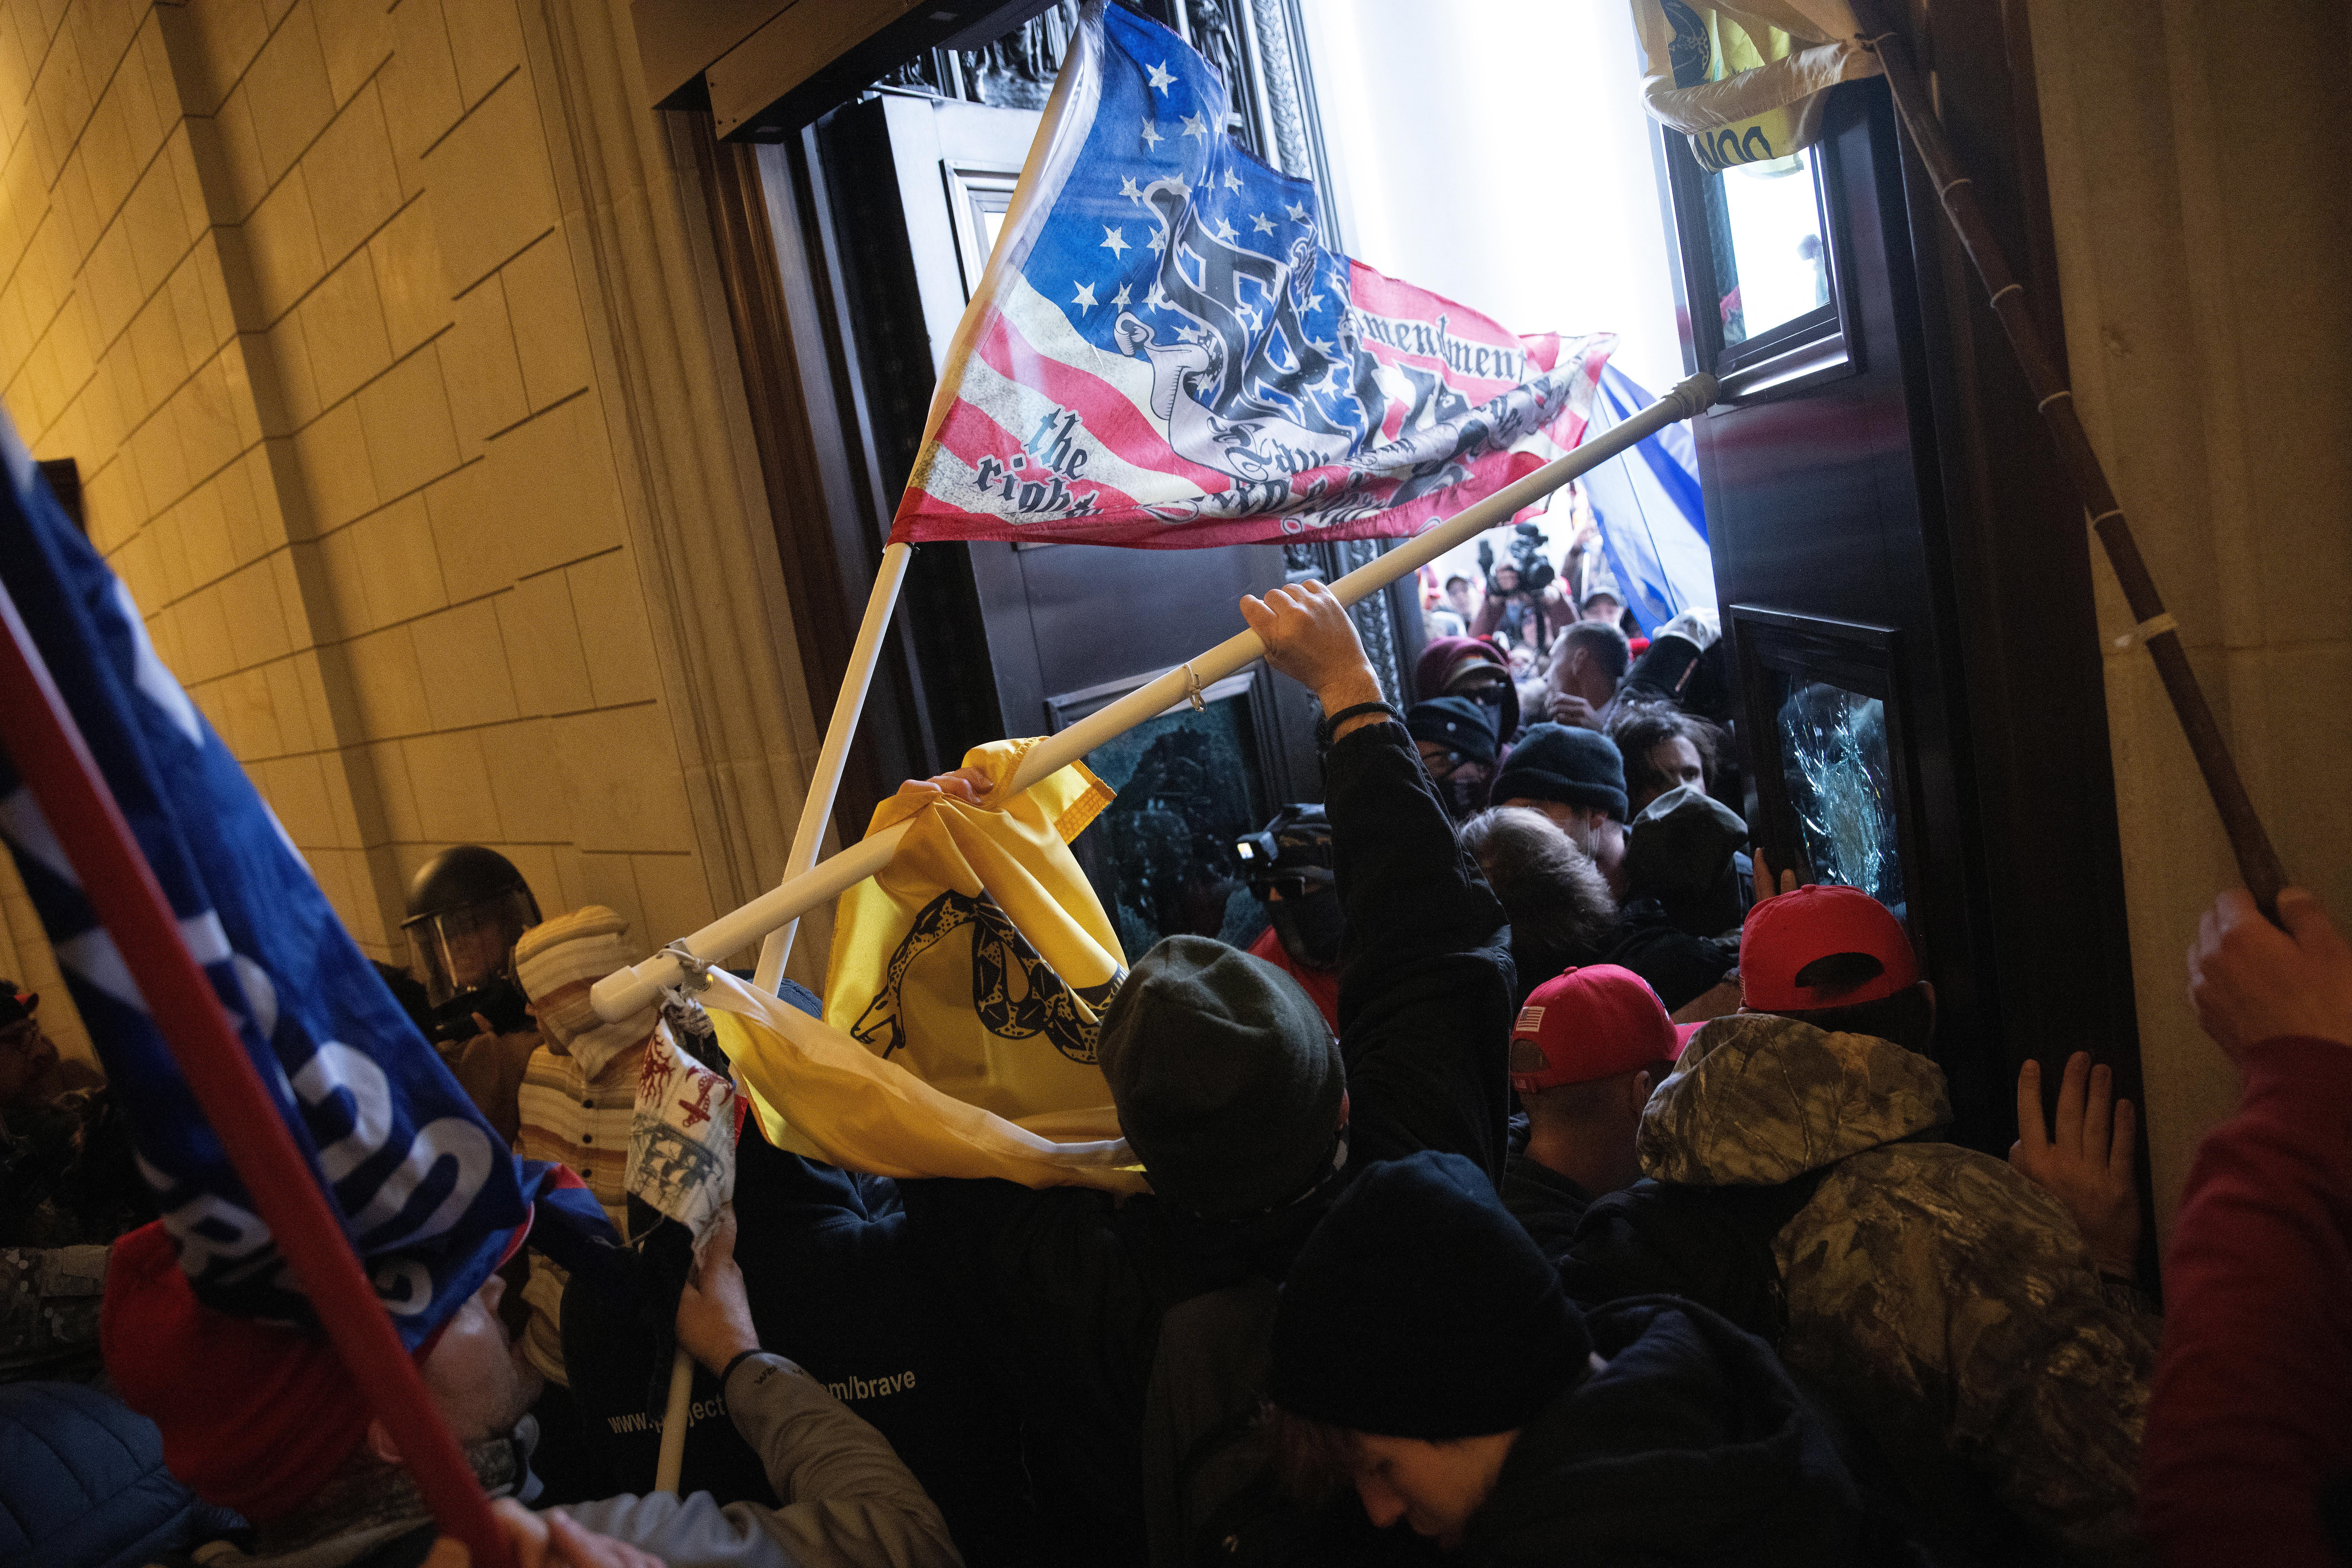 A mob of people carrying U.S. and Gadsden flags enters the Capitol building.